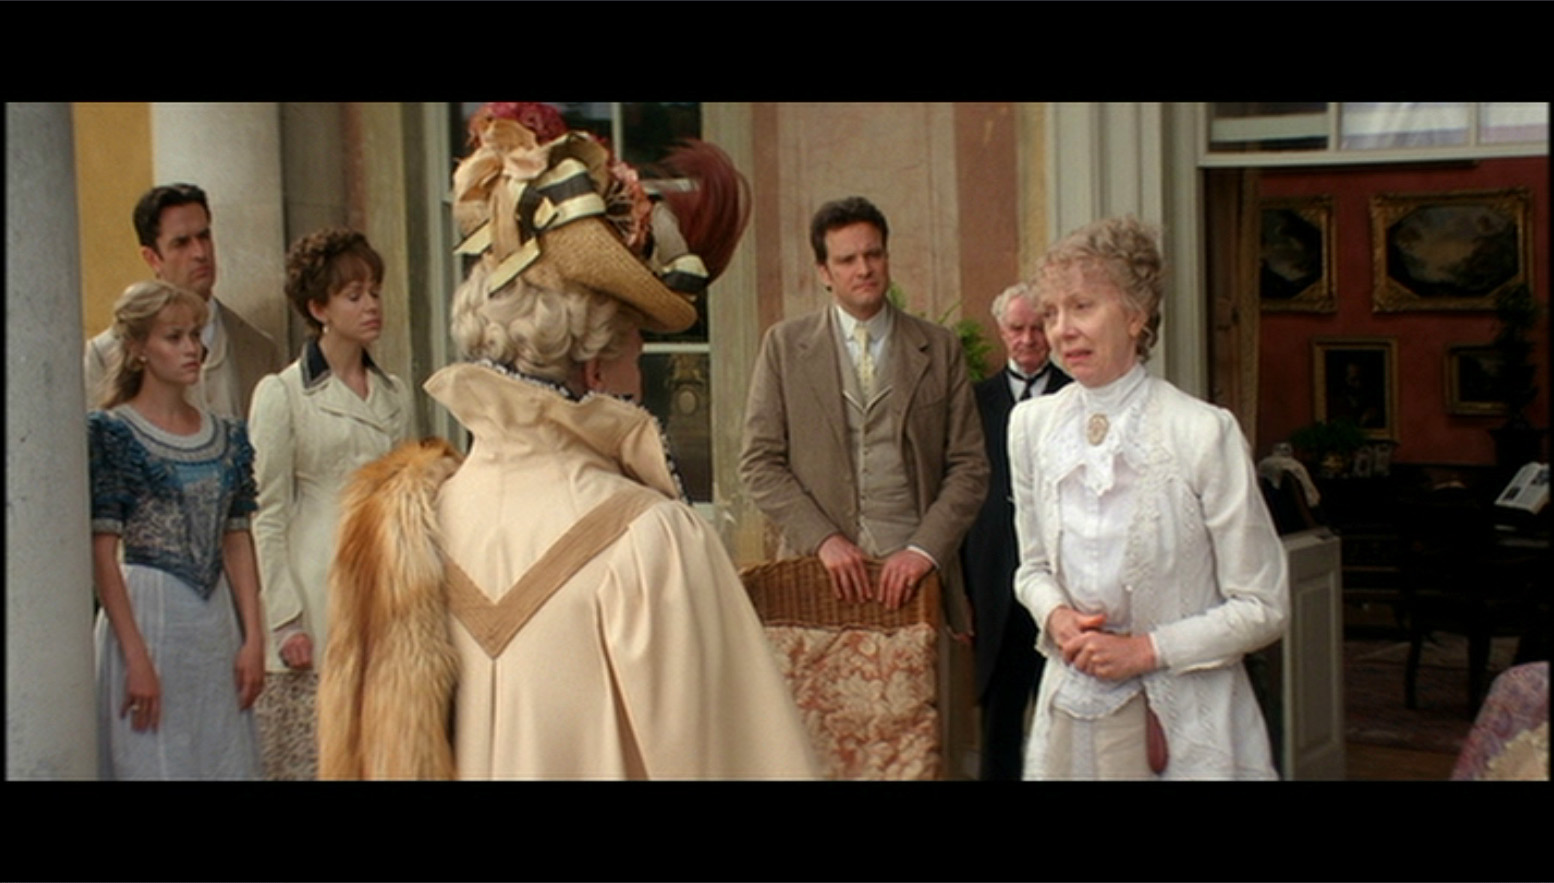 [The+Importance+of+Being+Earnest+77+copy.jpg]